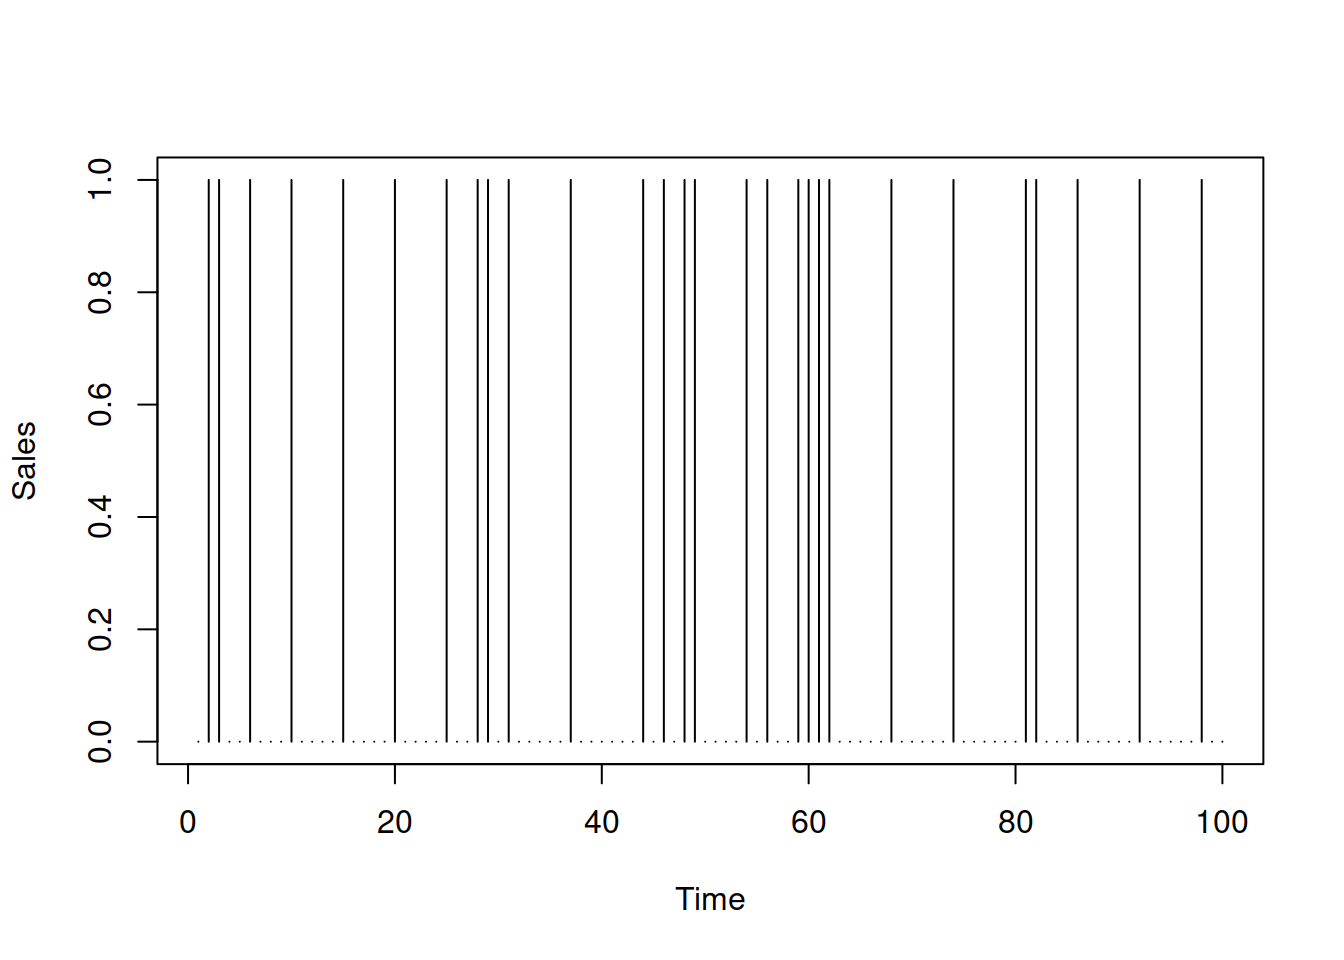 Example of intermittent time series with fixed demand sizes.